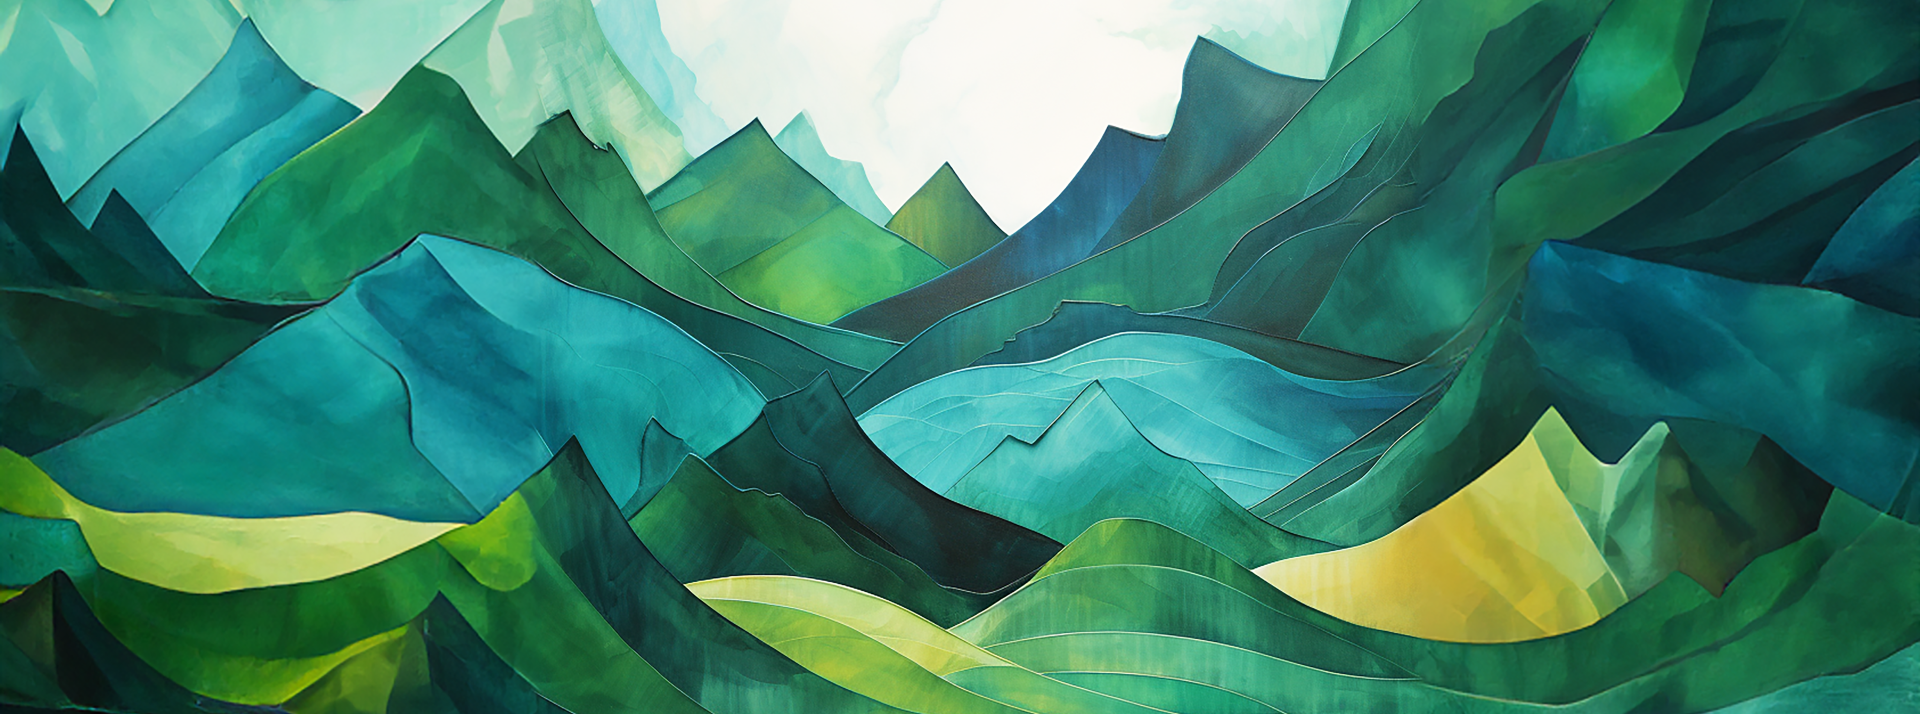 Abstract painting of a mountain landscape